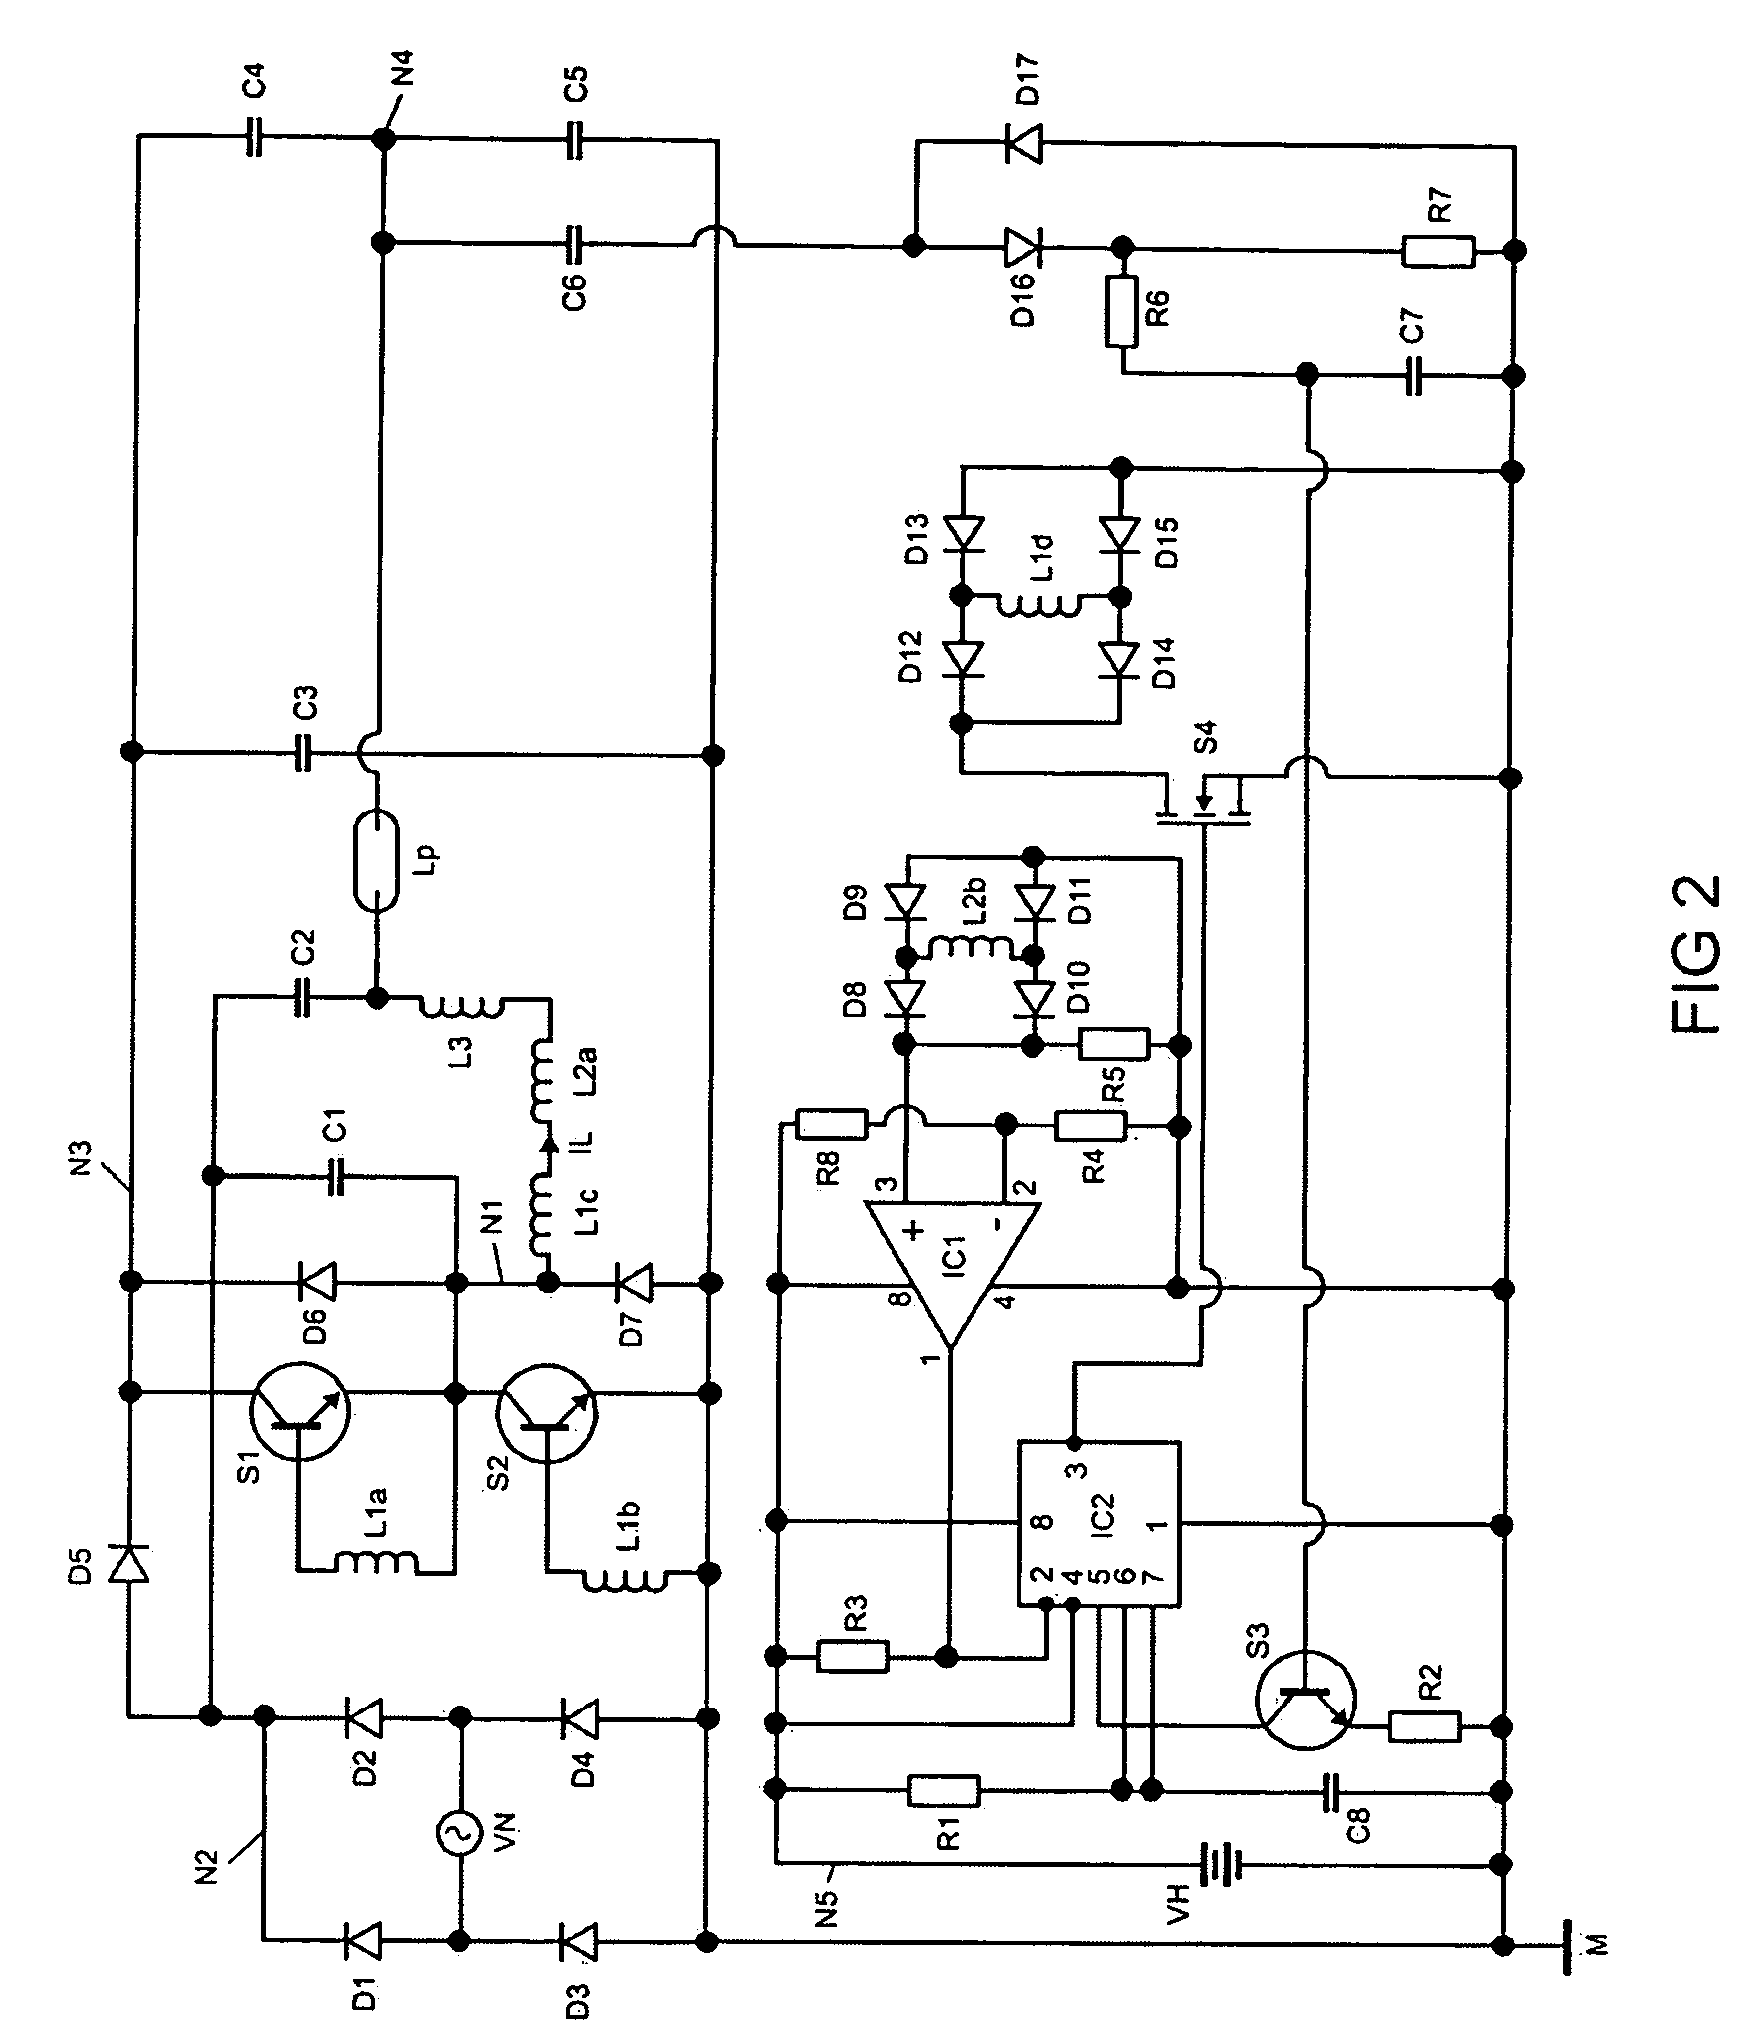 Circuit arrangement and method for operation of lamps